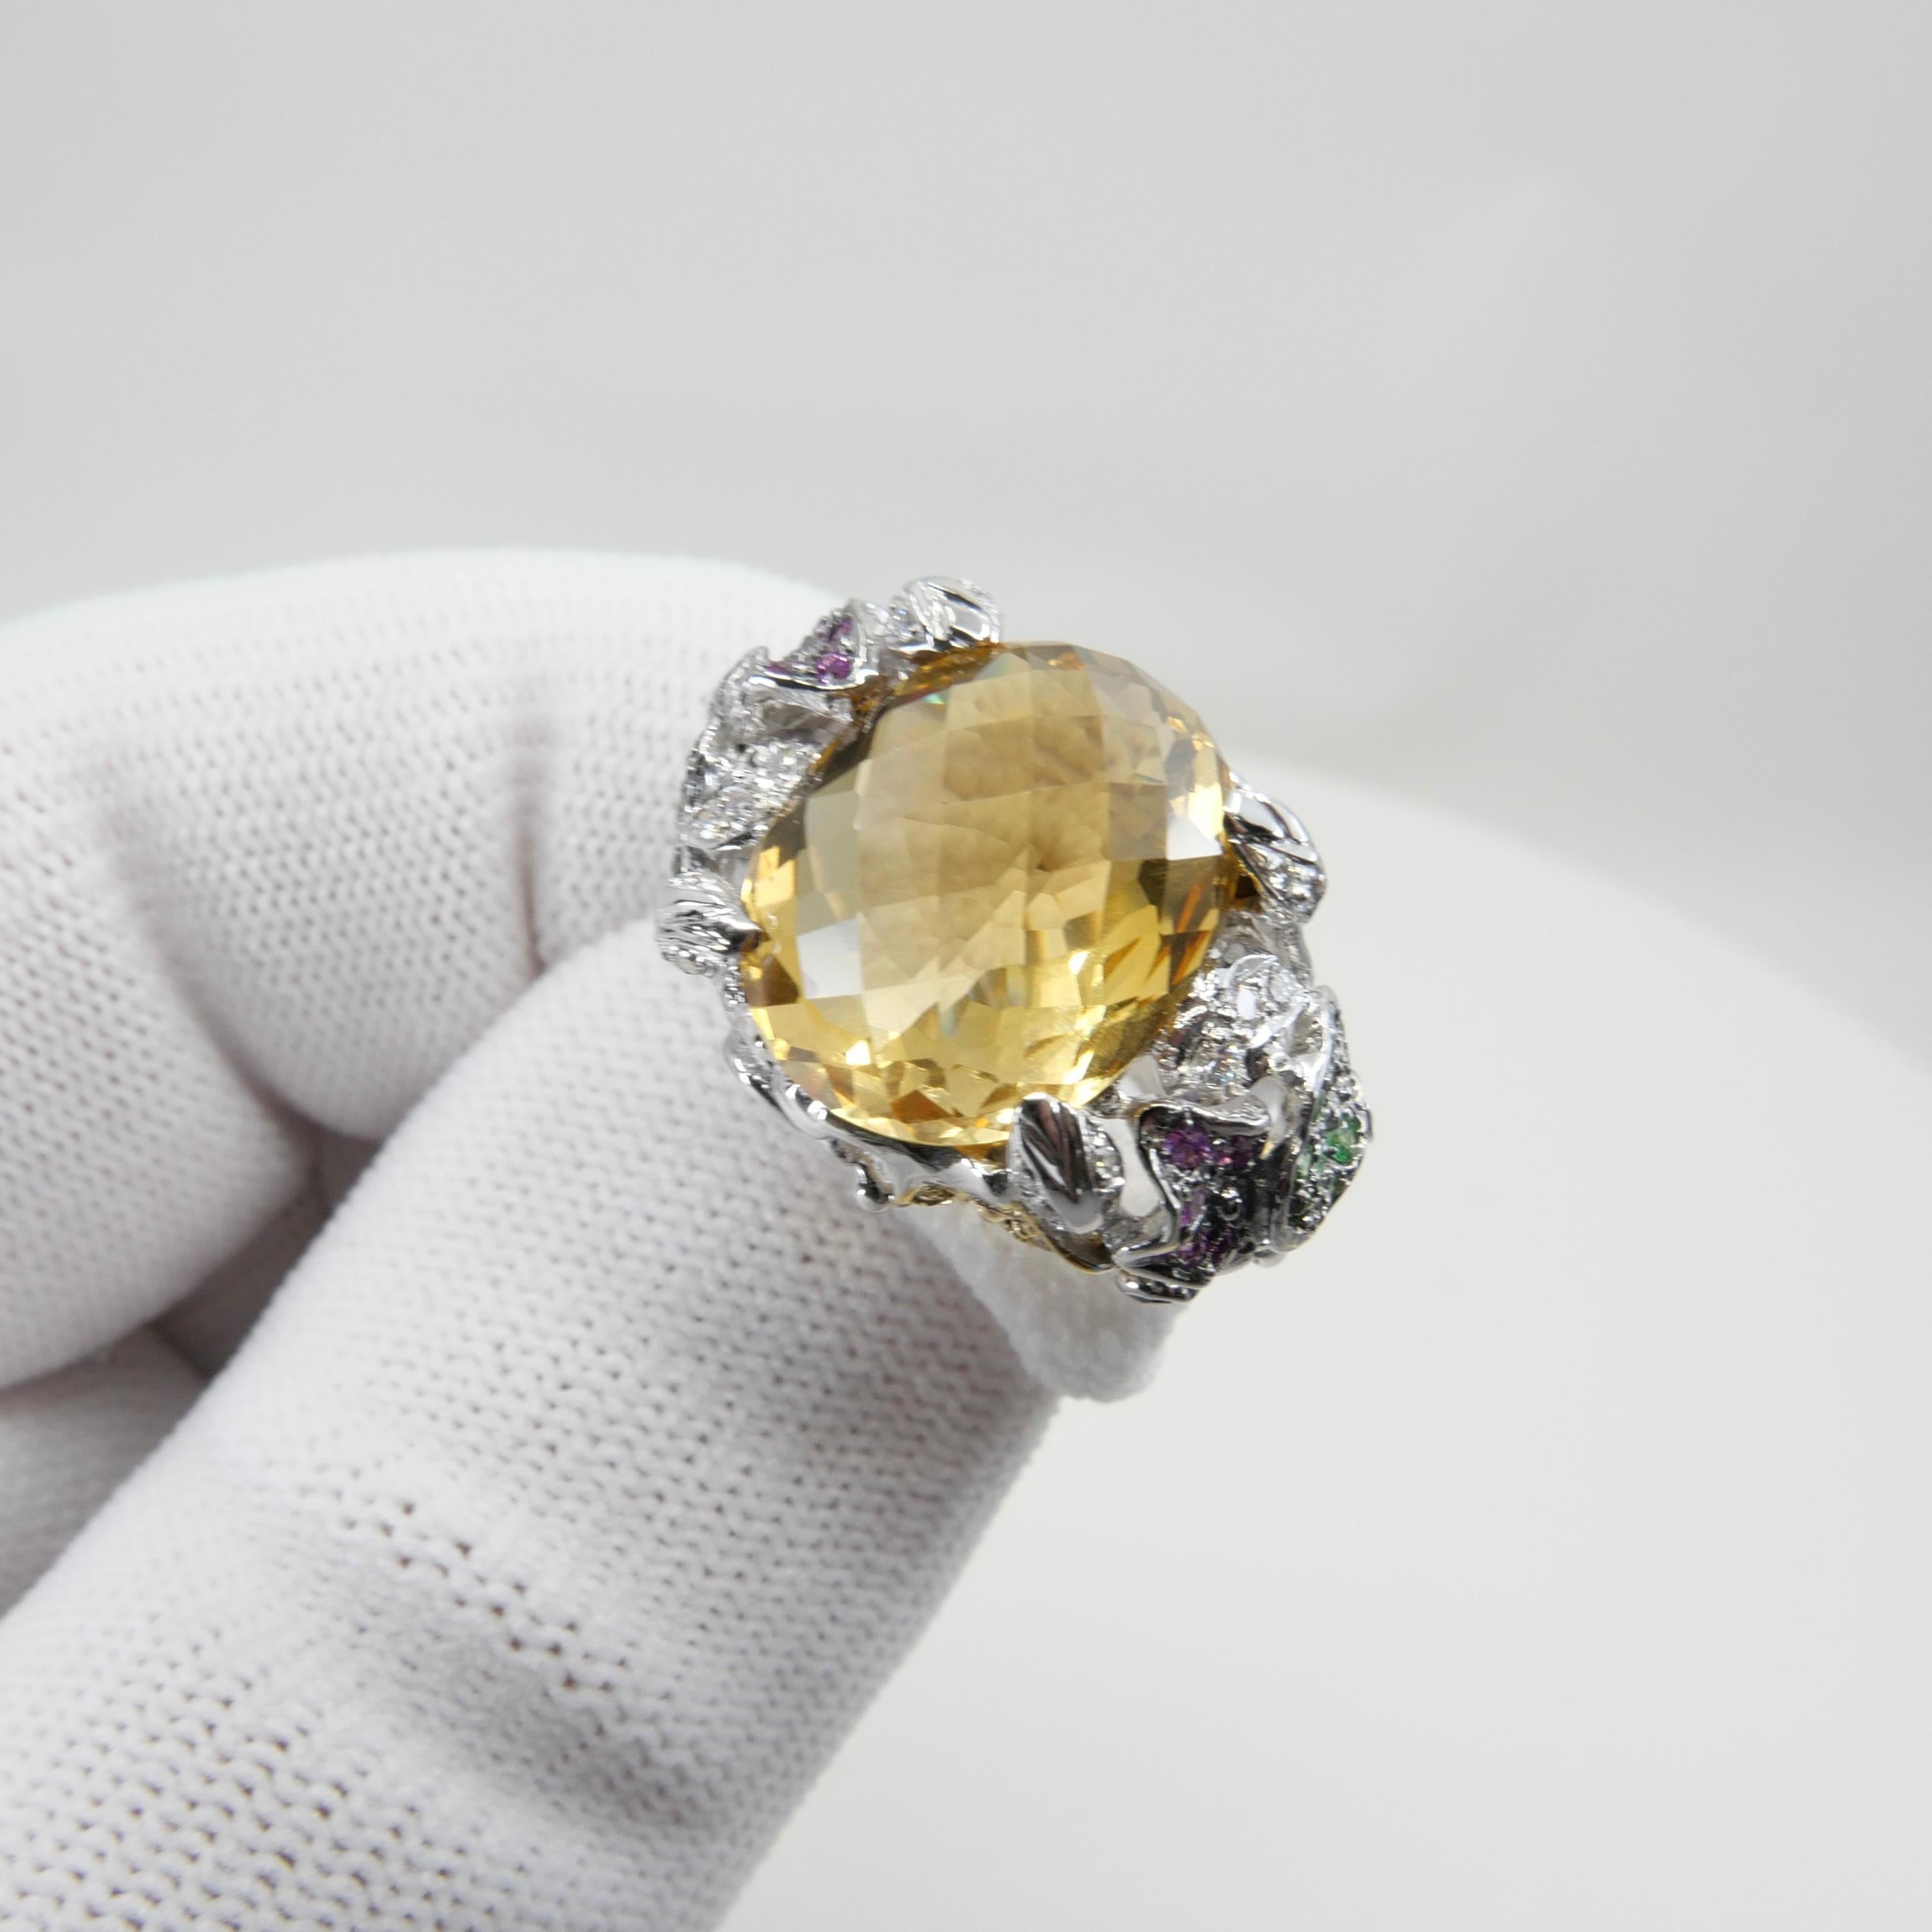 Cabochon Checker Cut Yellow Topaz, Diamond & Colored Gemstones Cocktail Ring, Colorful For Sale